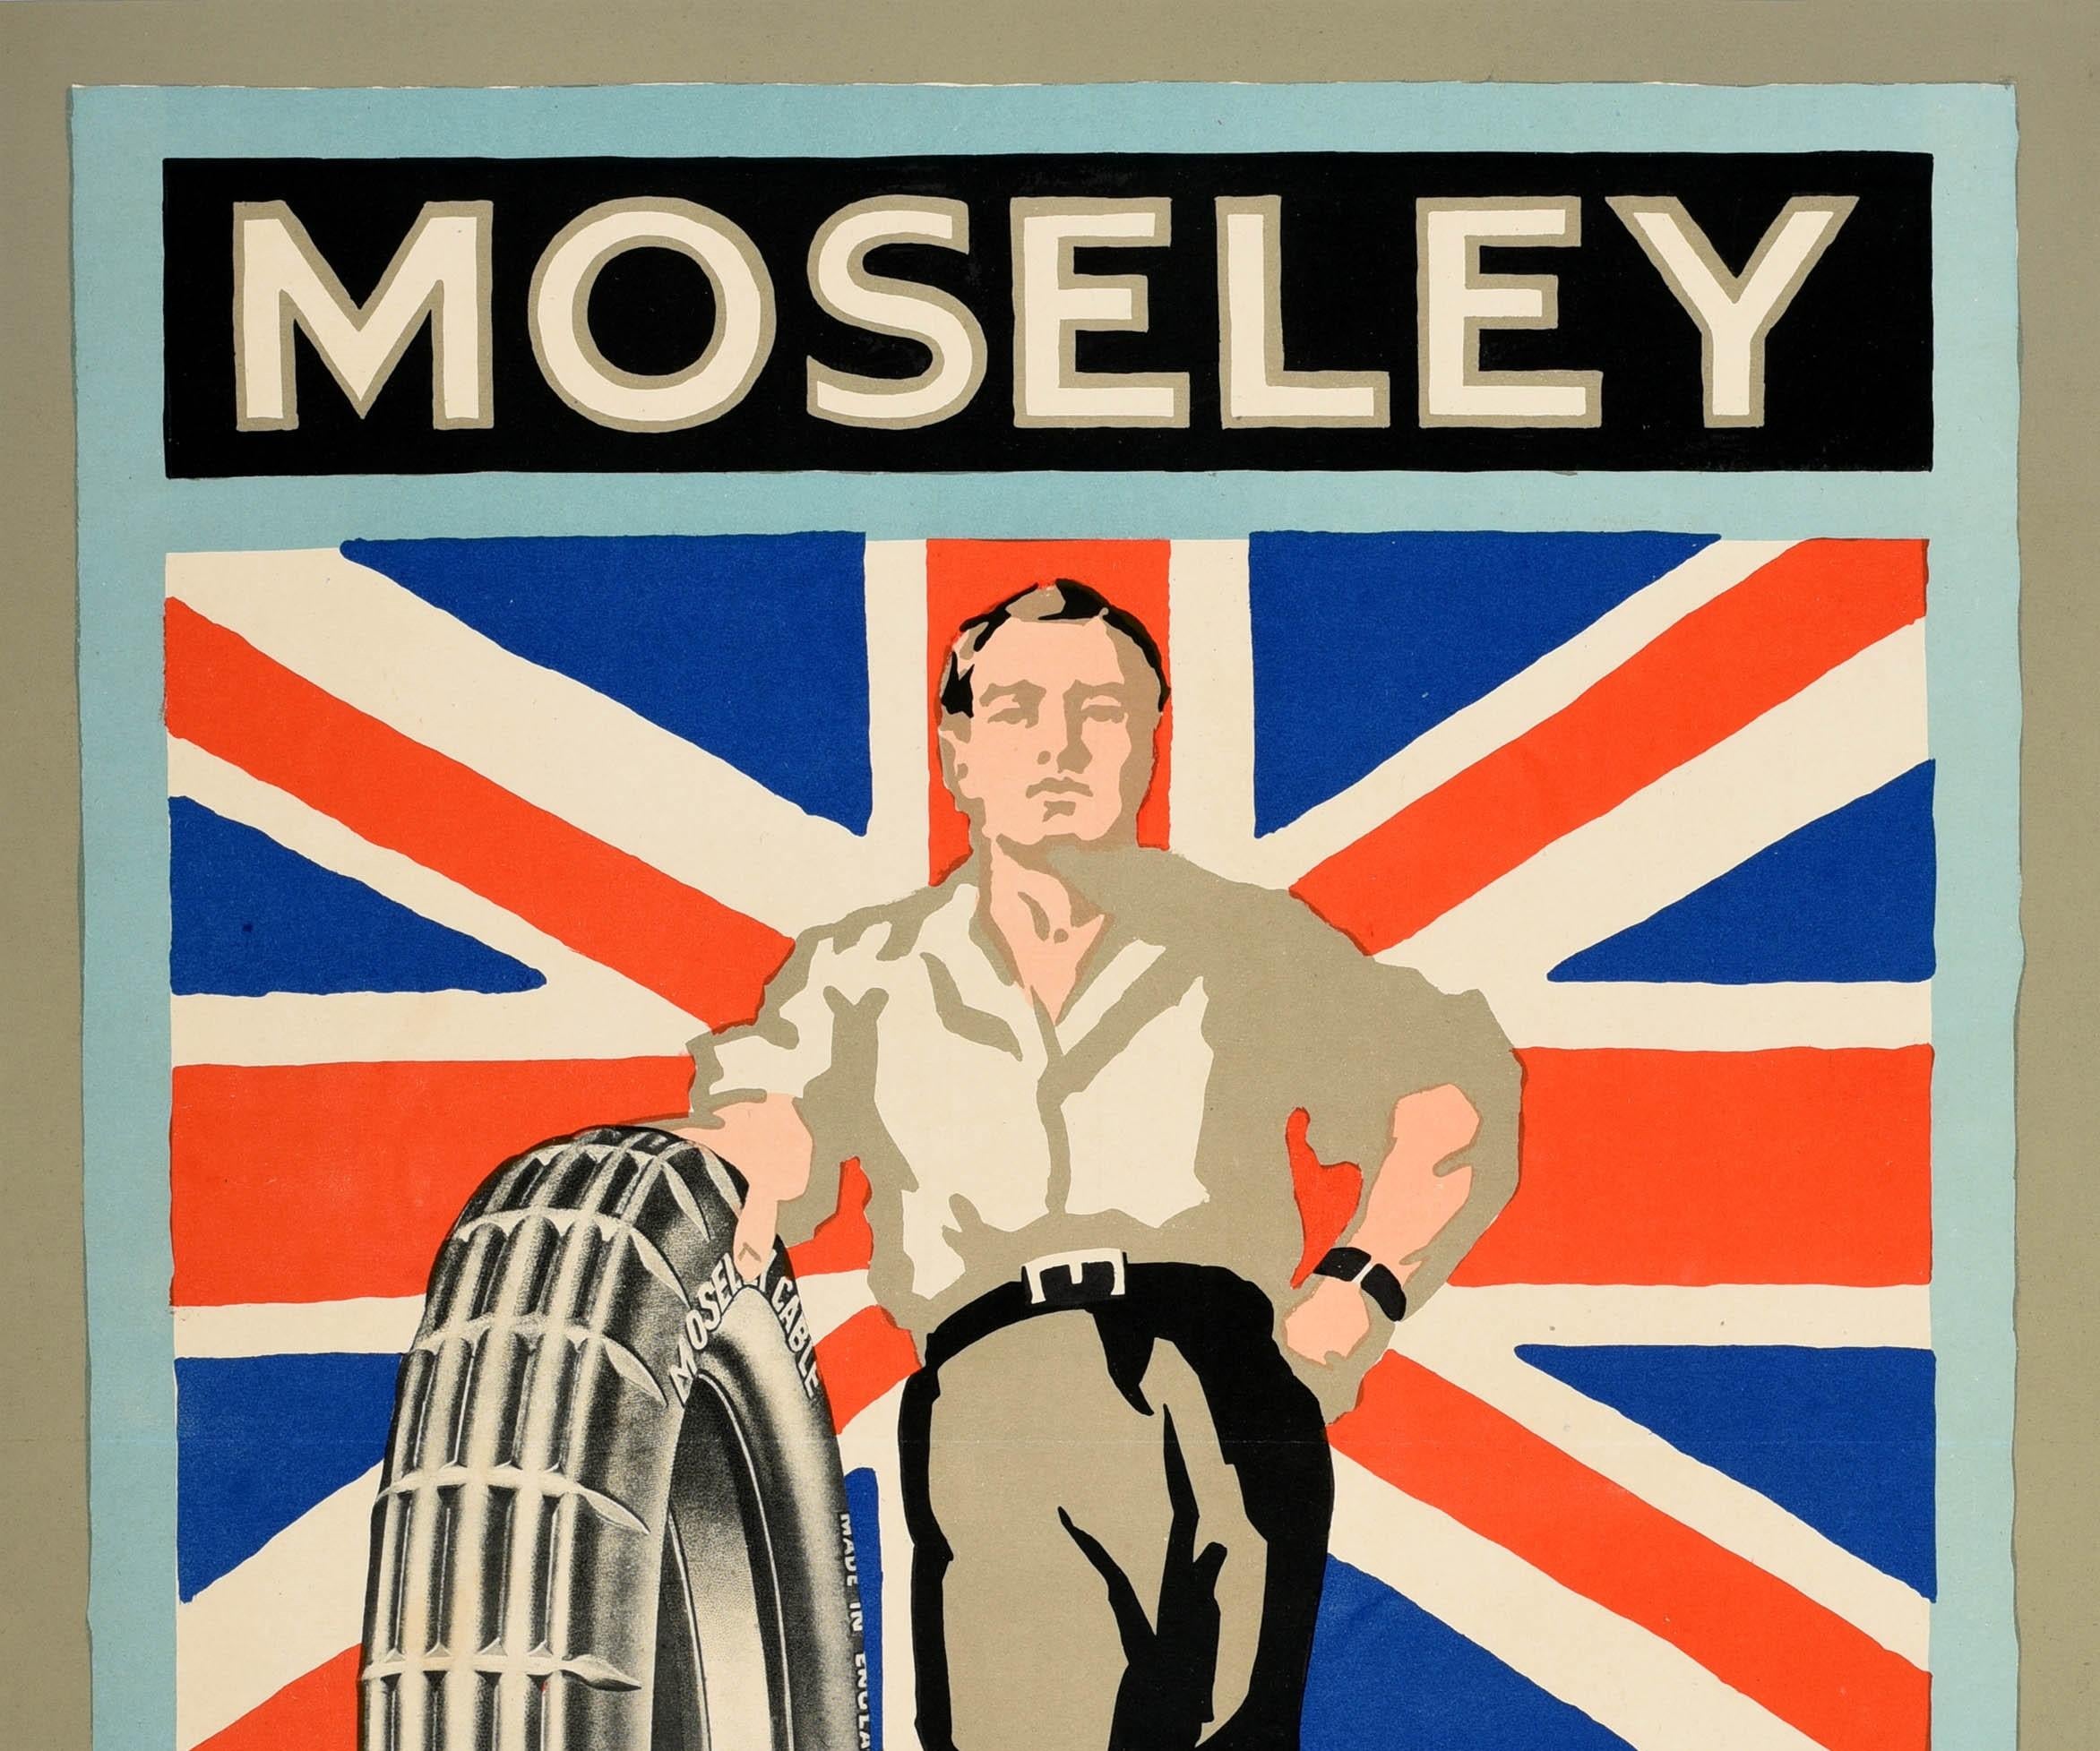 Original vintage advertising poster for Moseley Silent Running Non Skid Tyres featuring a great design depicting a man holding a sturdy rubber tyre in front of a Silhouette of a factory and a red white and blue Union Jack flag against a pale blue